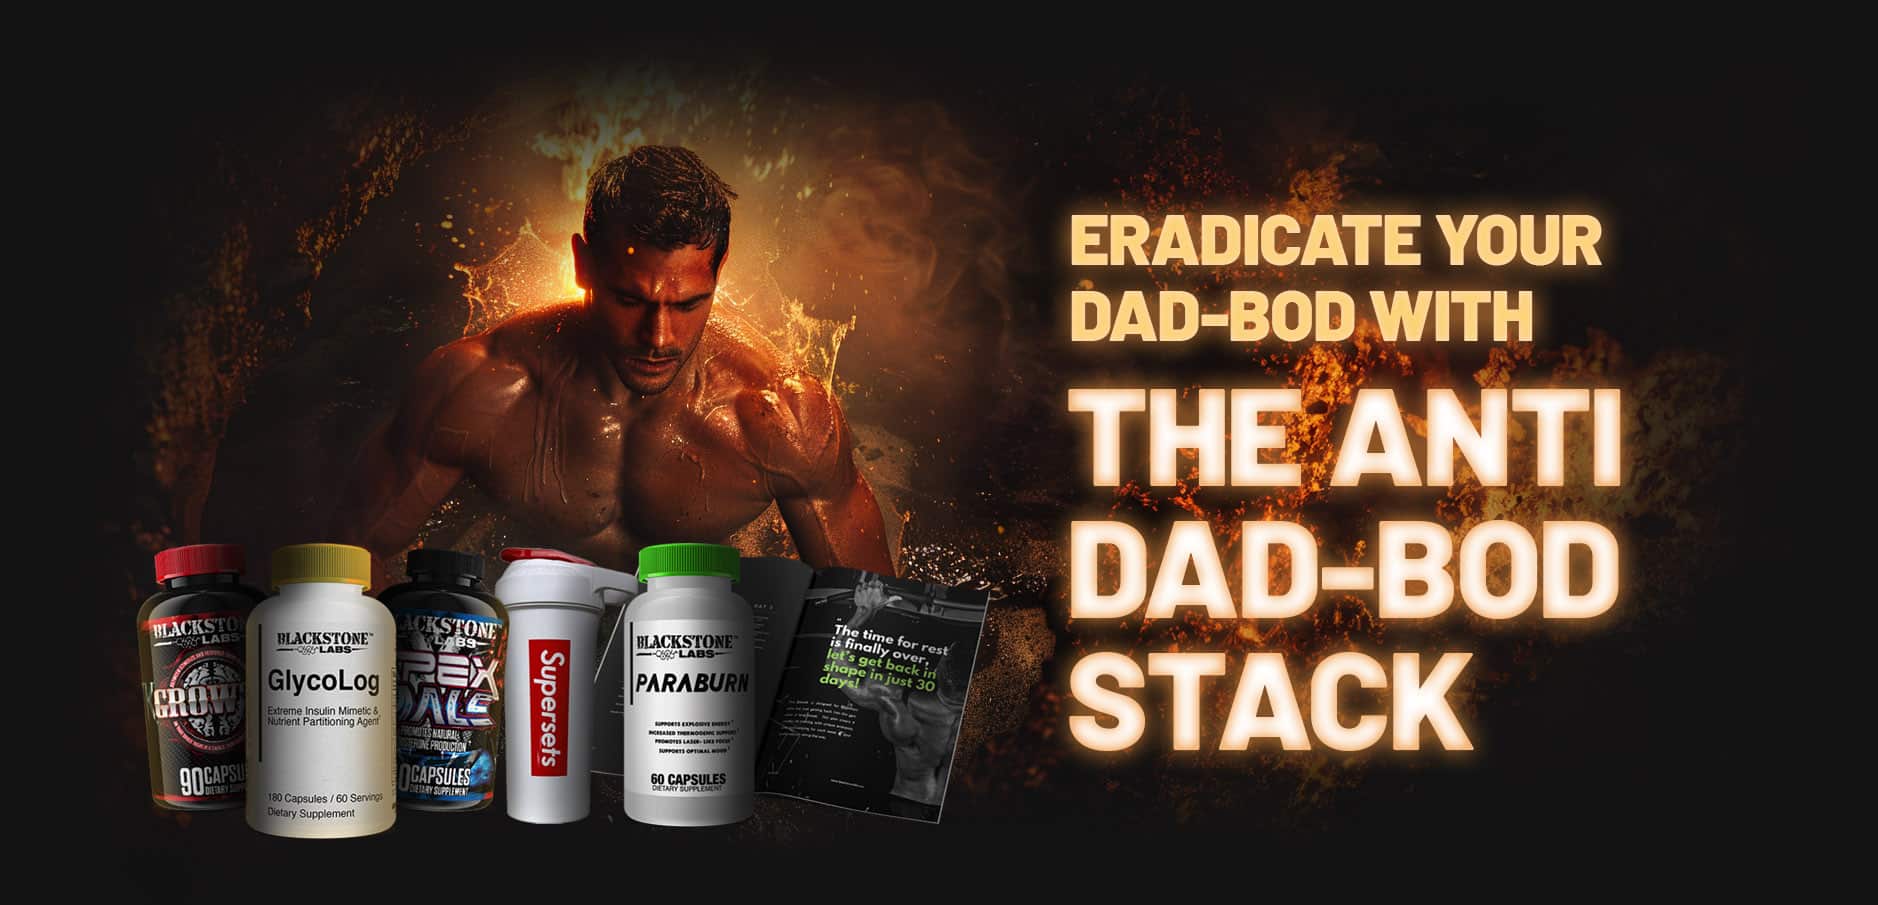 Eradicate your dad bod with the Anti Dad-Bod Stack (Growth, Glycolog, Apex Male, Paraburn, Shaker, and E-Book.